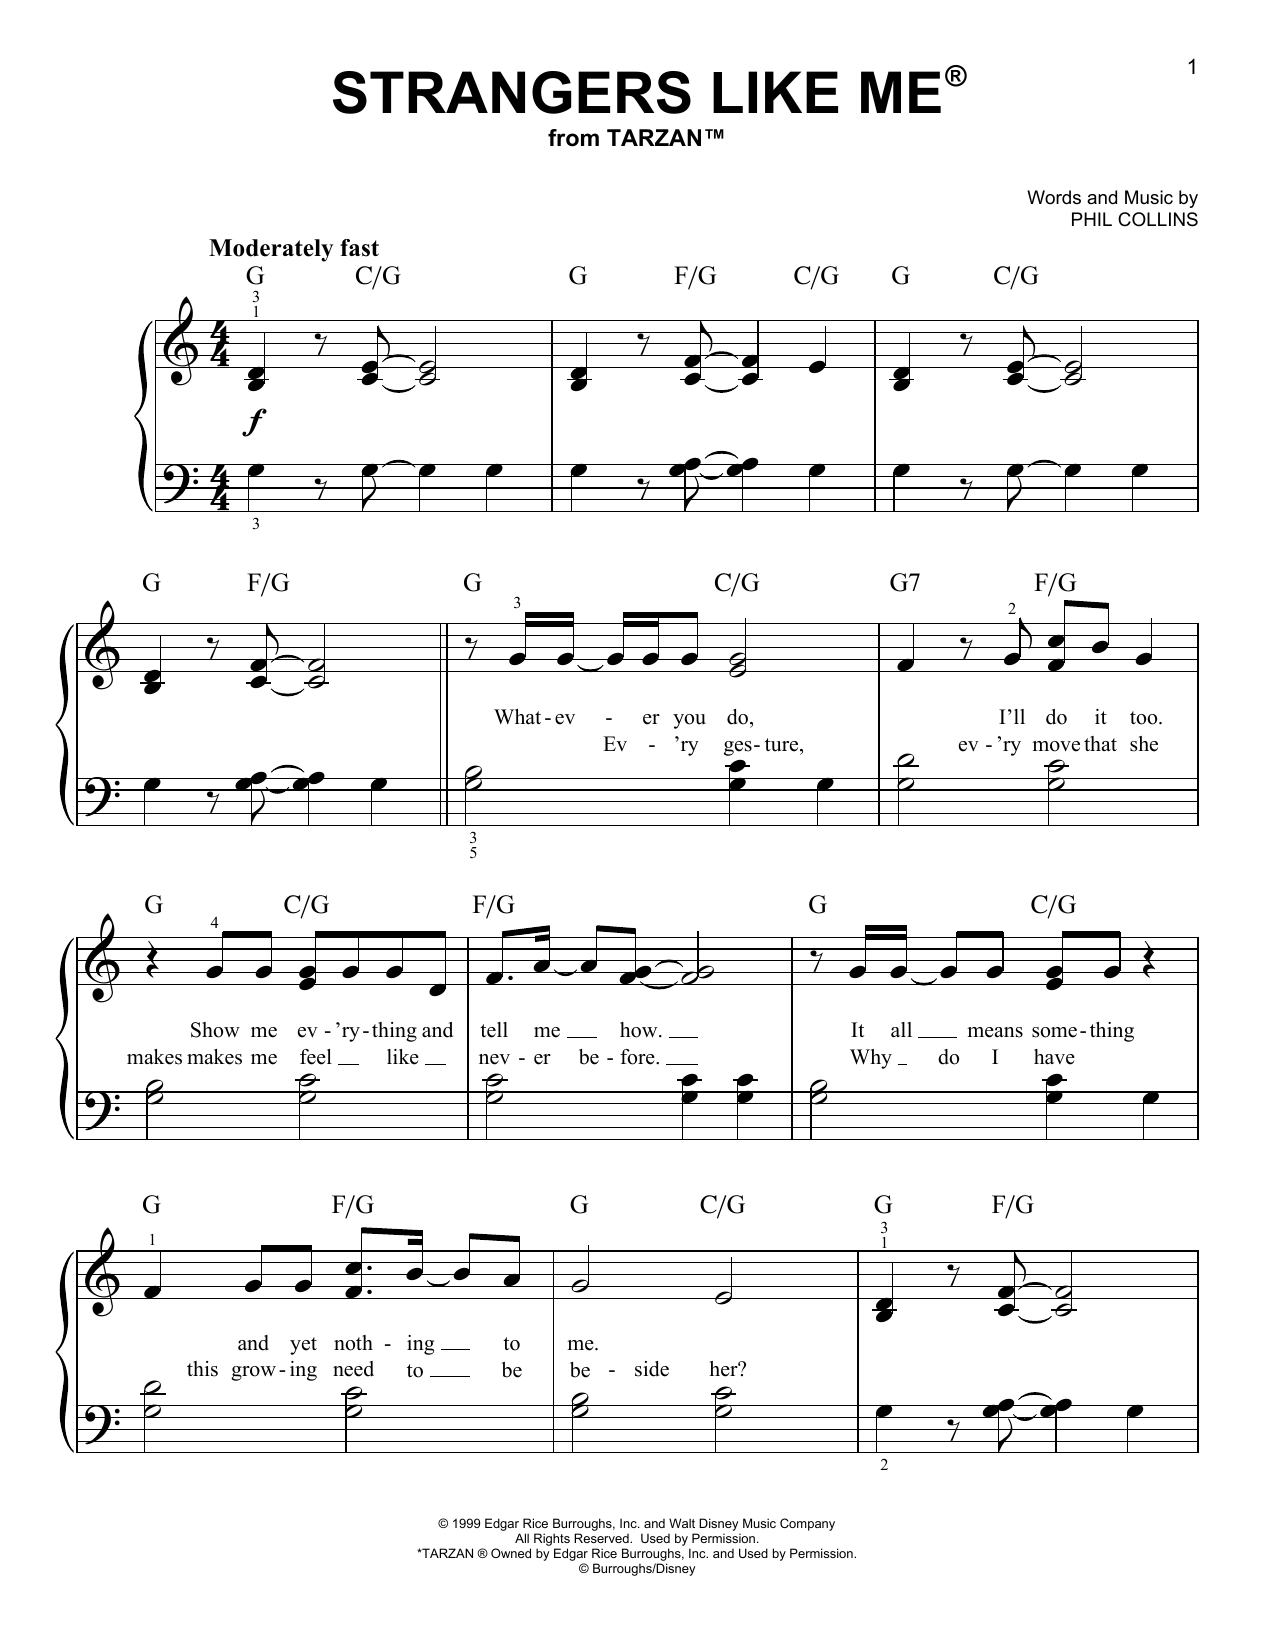 Download Phil Collins Strangers Like Me (from Tarzan) Sheet Music